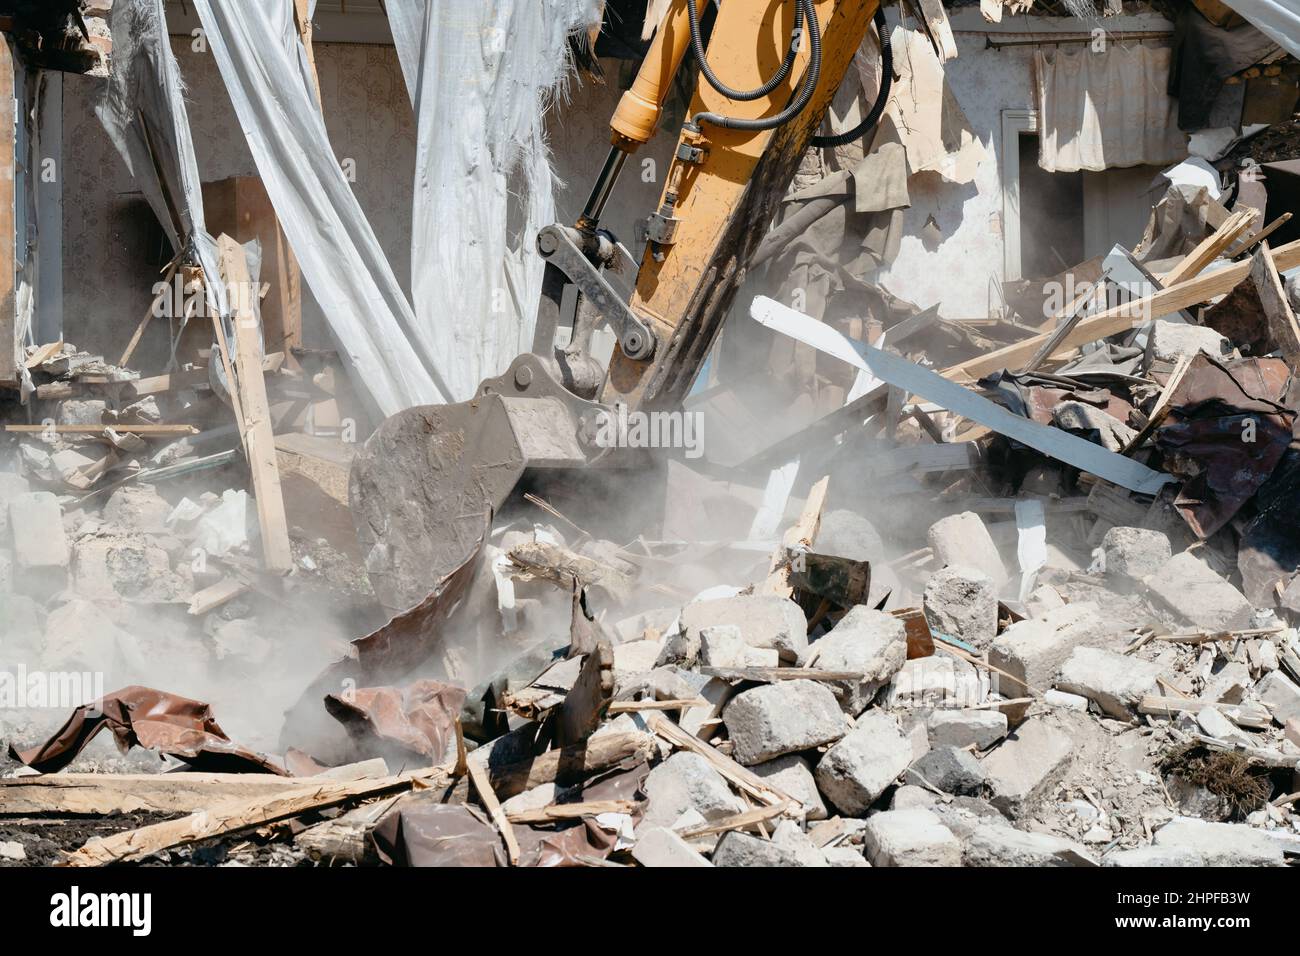 Close-up of excavator bucket raking in industrial debris. Demolishing of old dilapidated house for construction of modern housing. Stock Photo